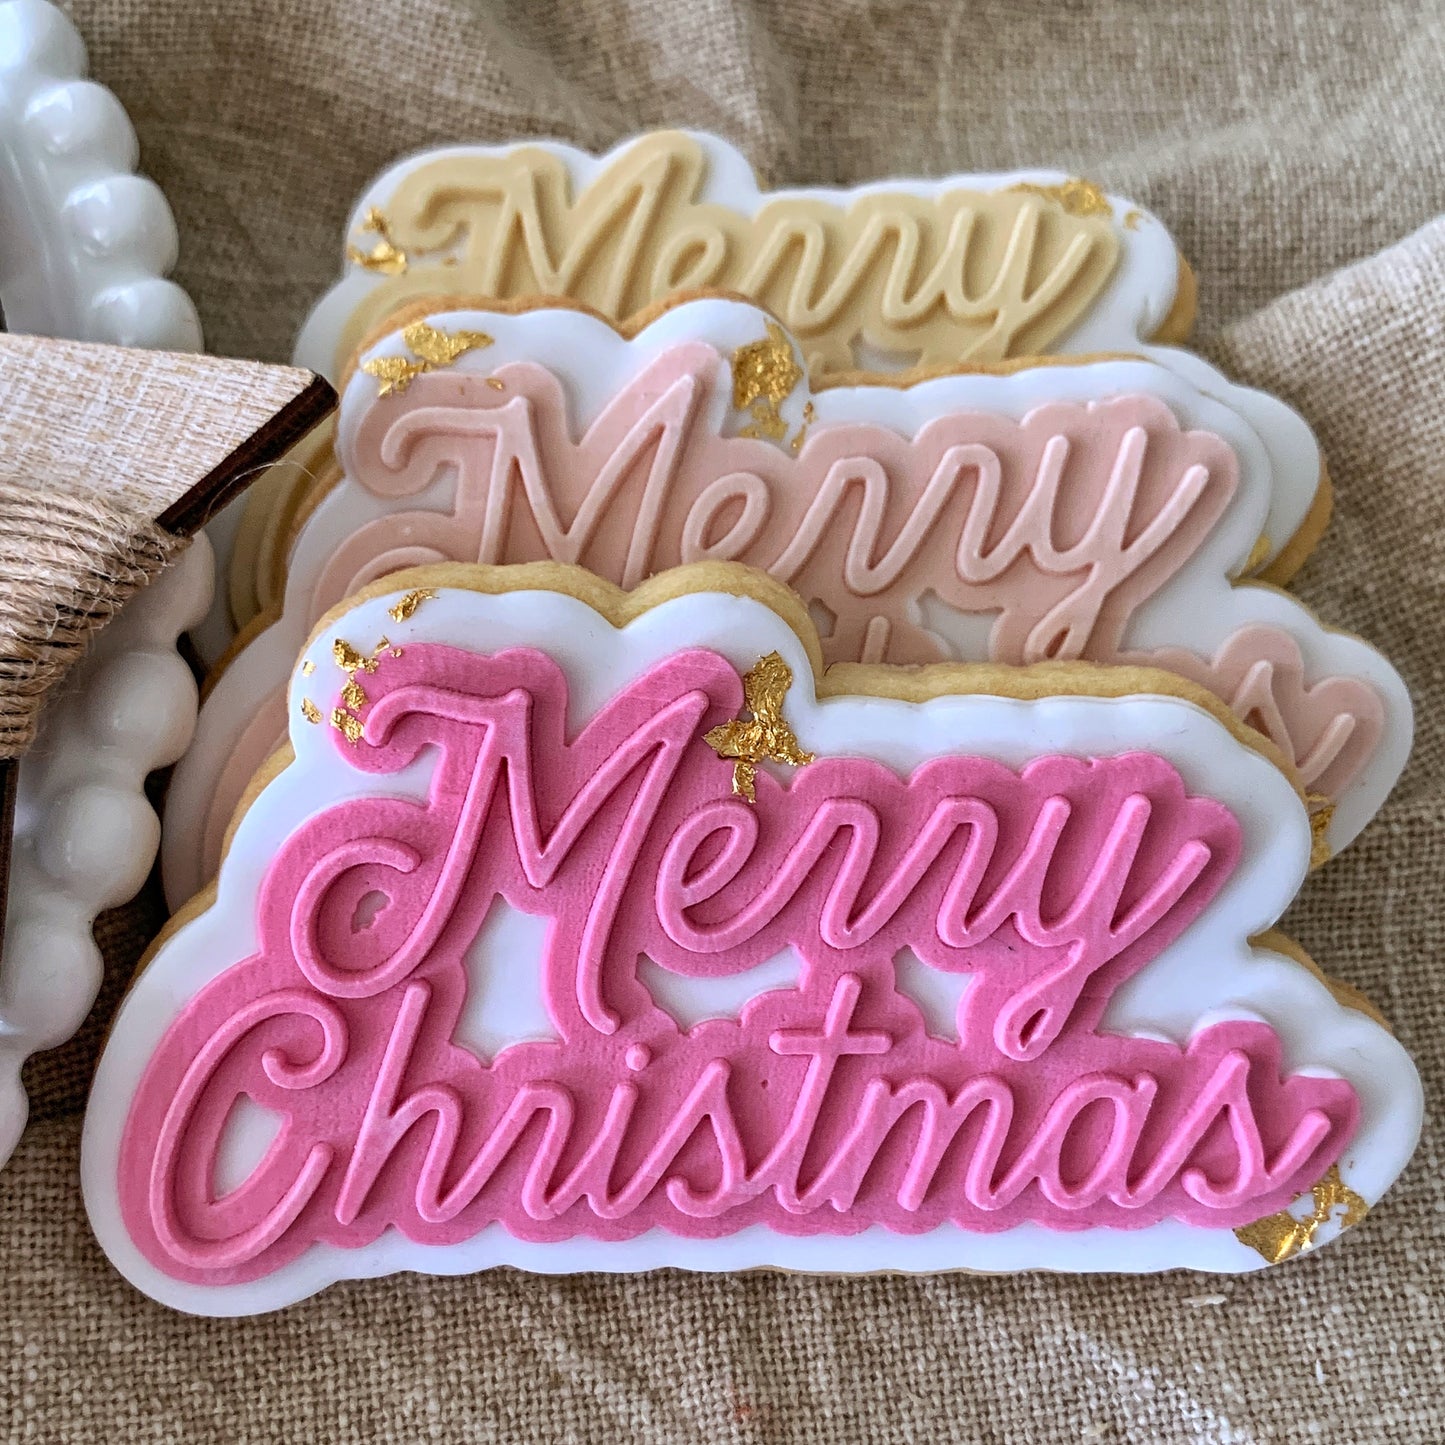 Merry Christmas Cookie Stamp & Cutter